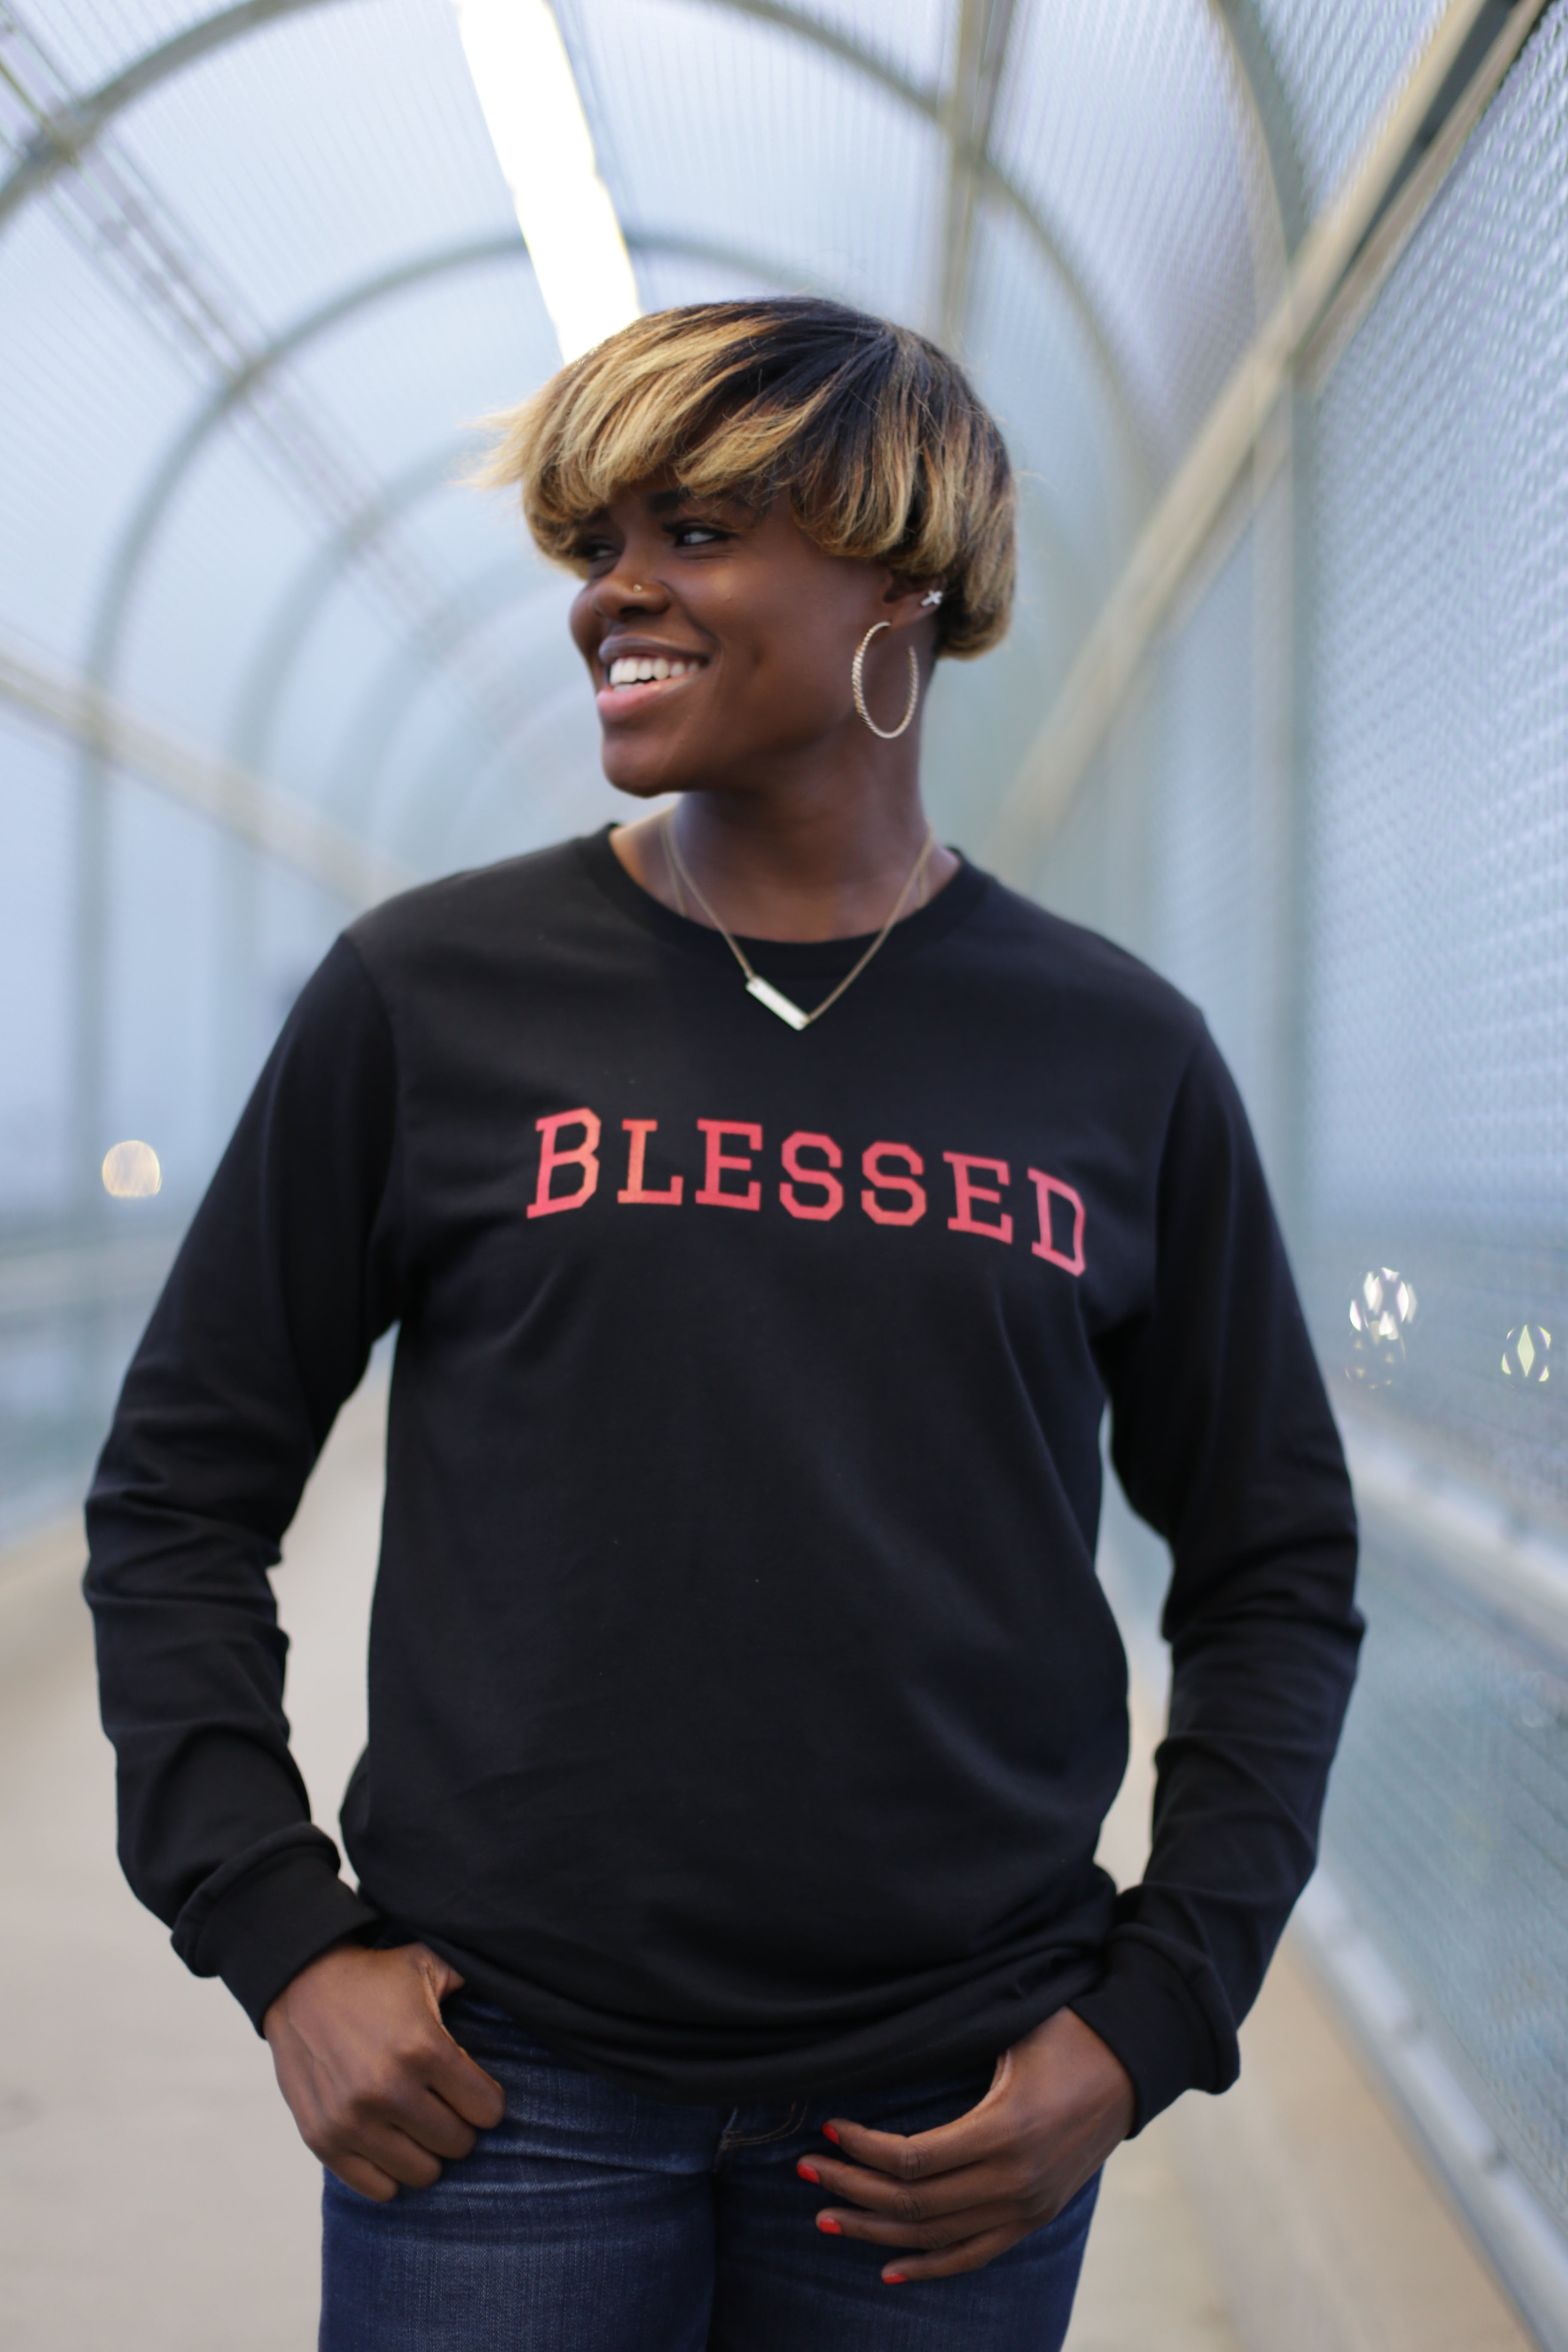 Blessed - Highly Favored